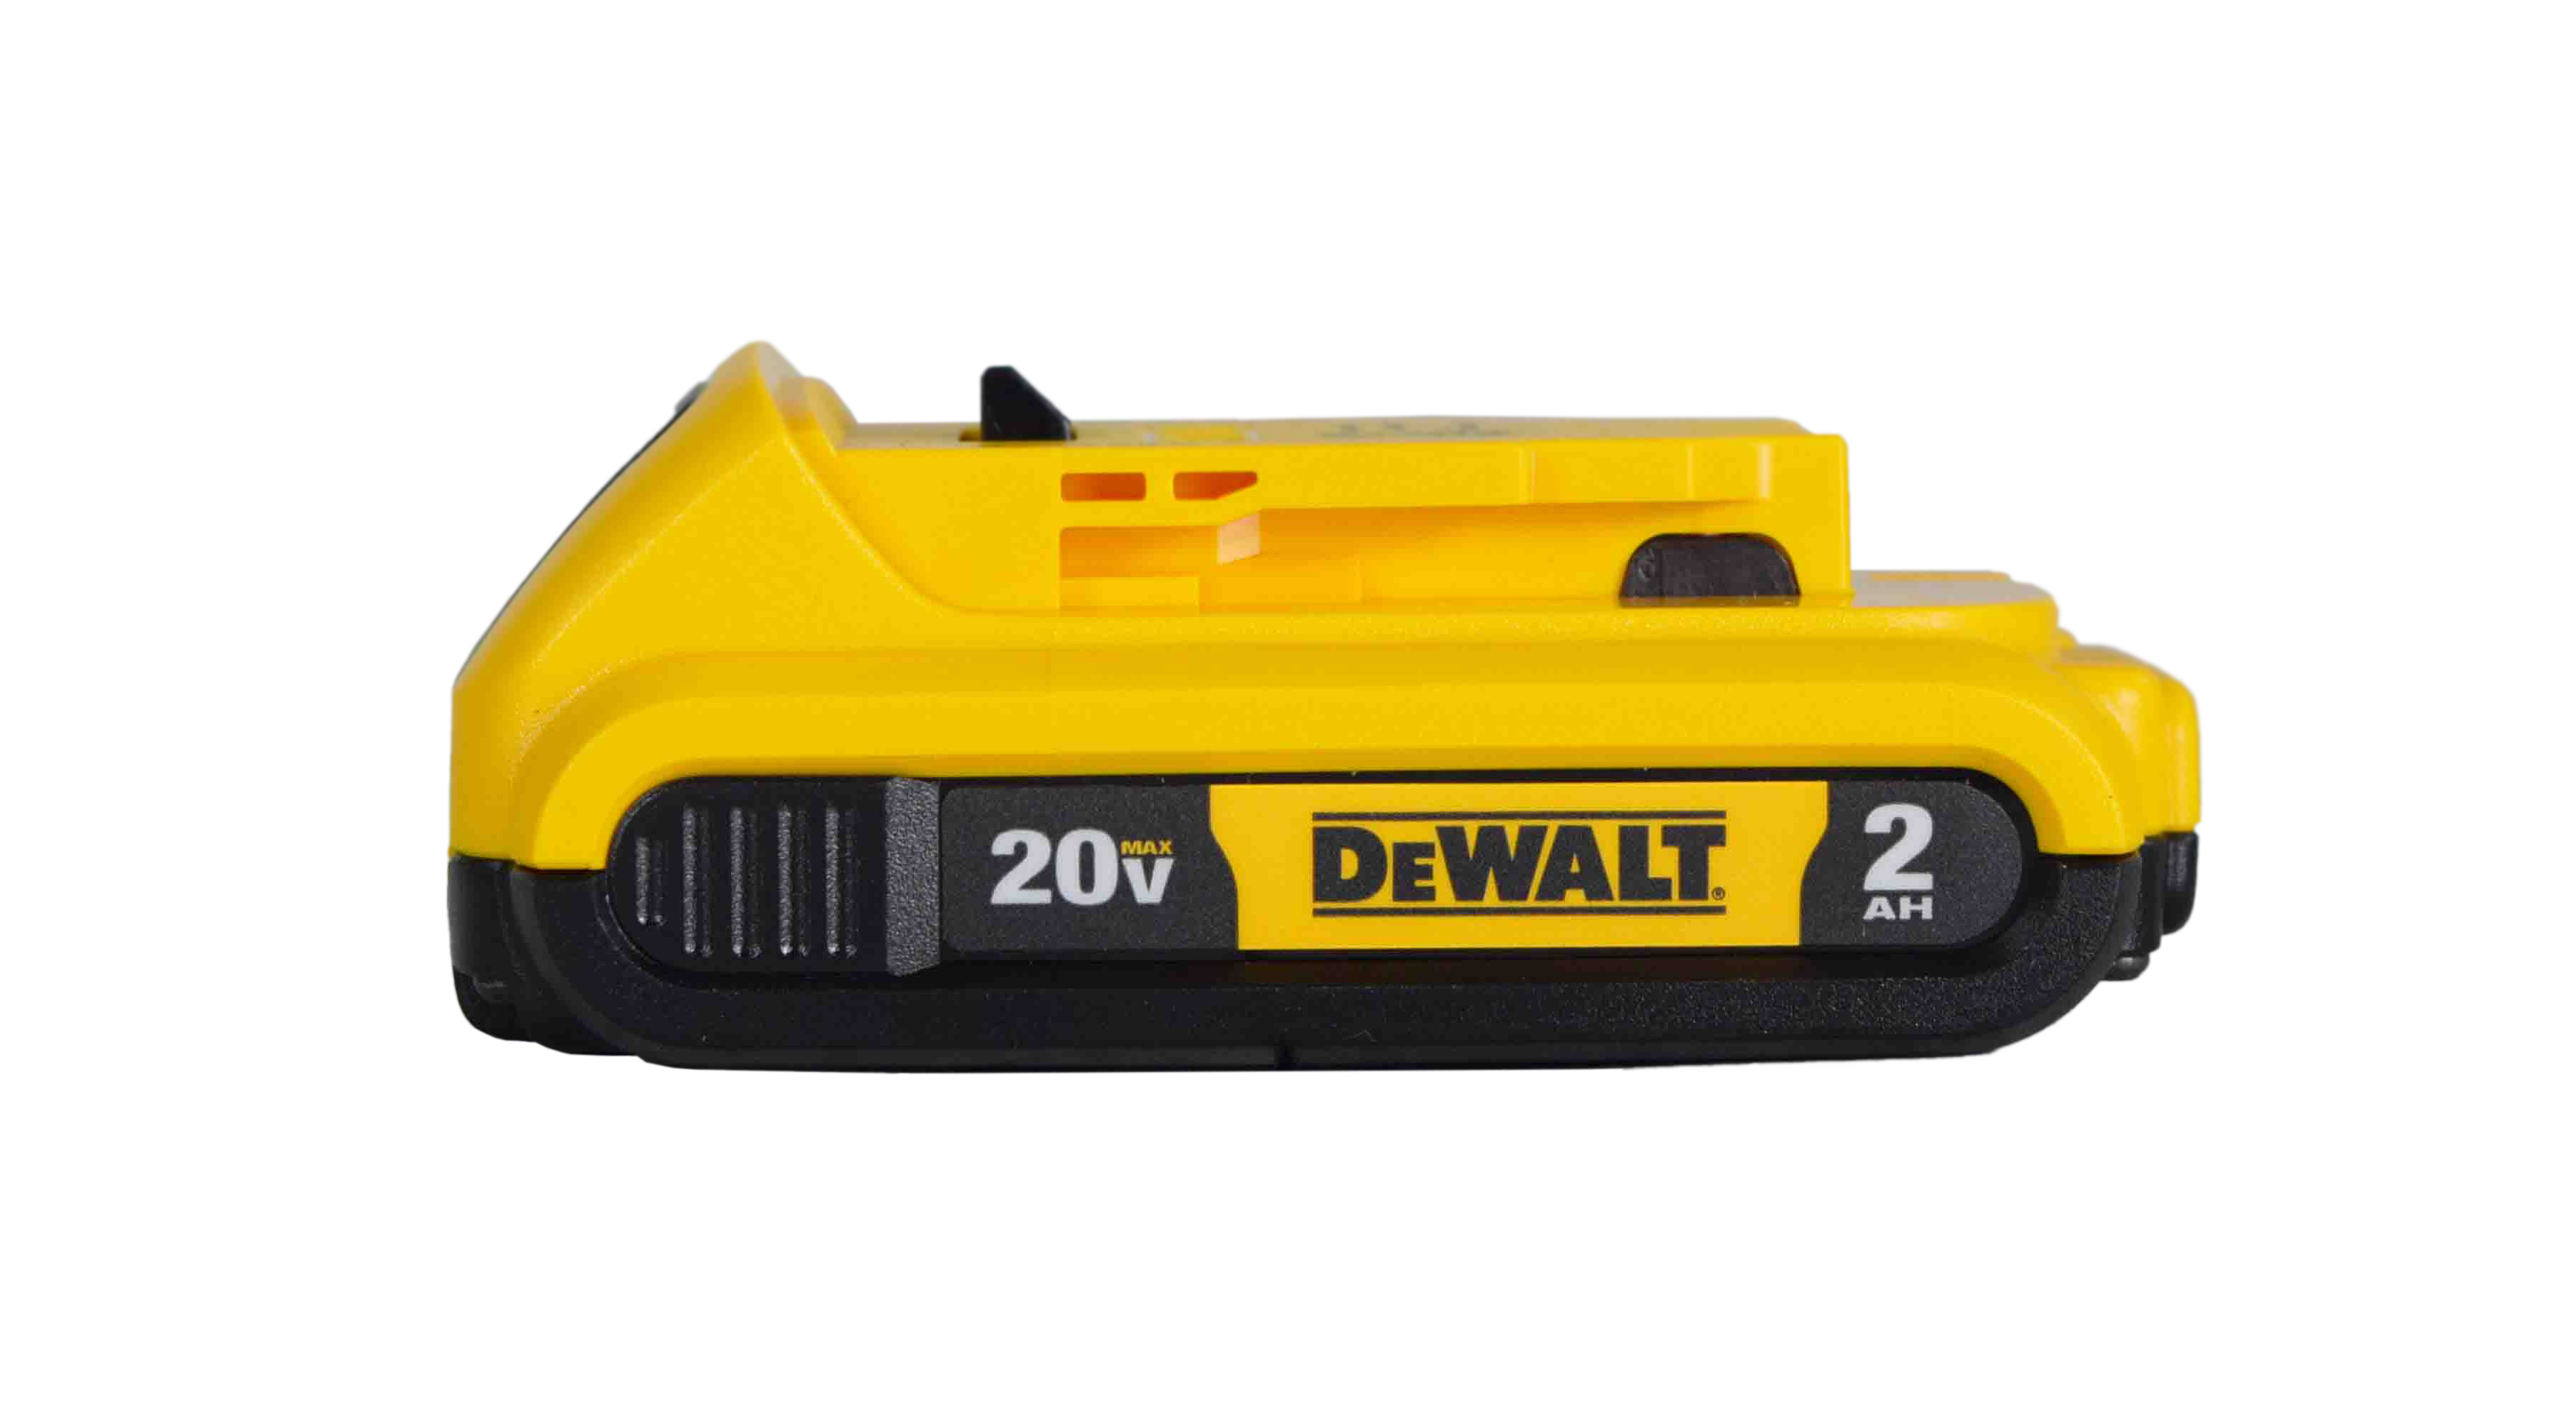 DeWALT Max Compact Lithium-Ion 20V 2Ah Battery DCB203 - Three Pack - image 4 of 5